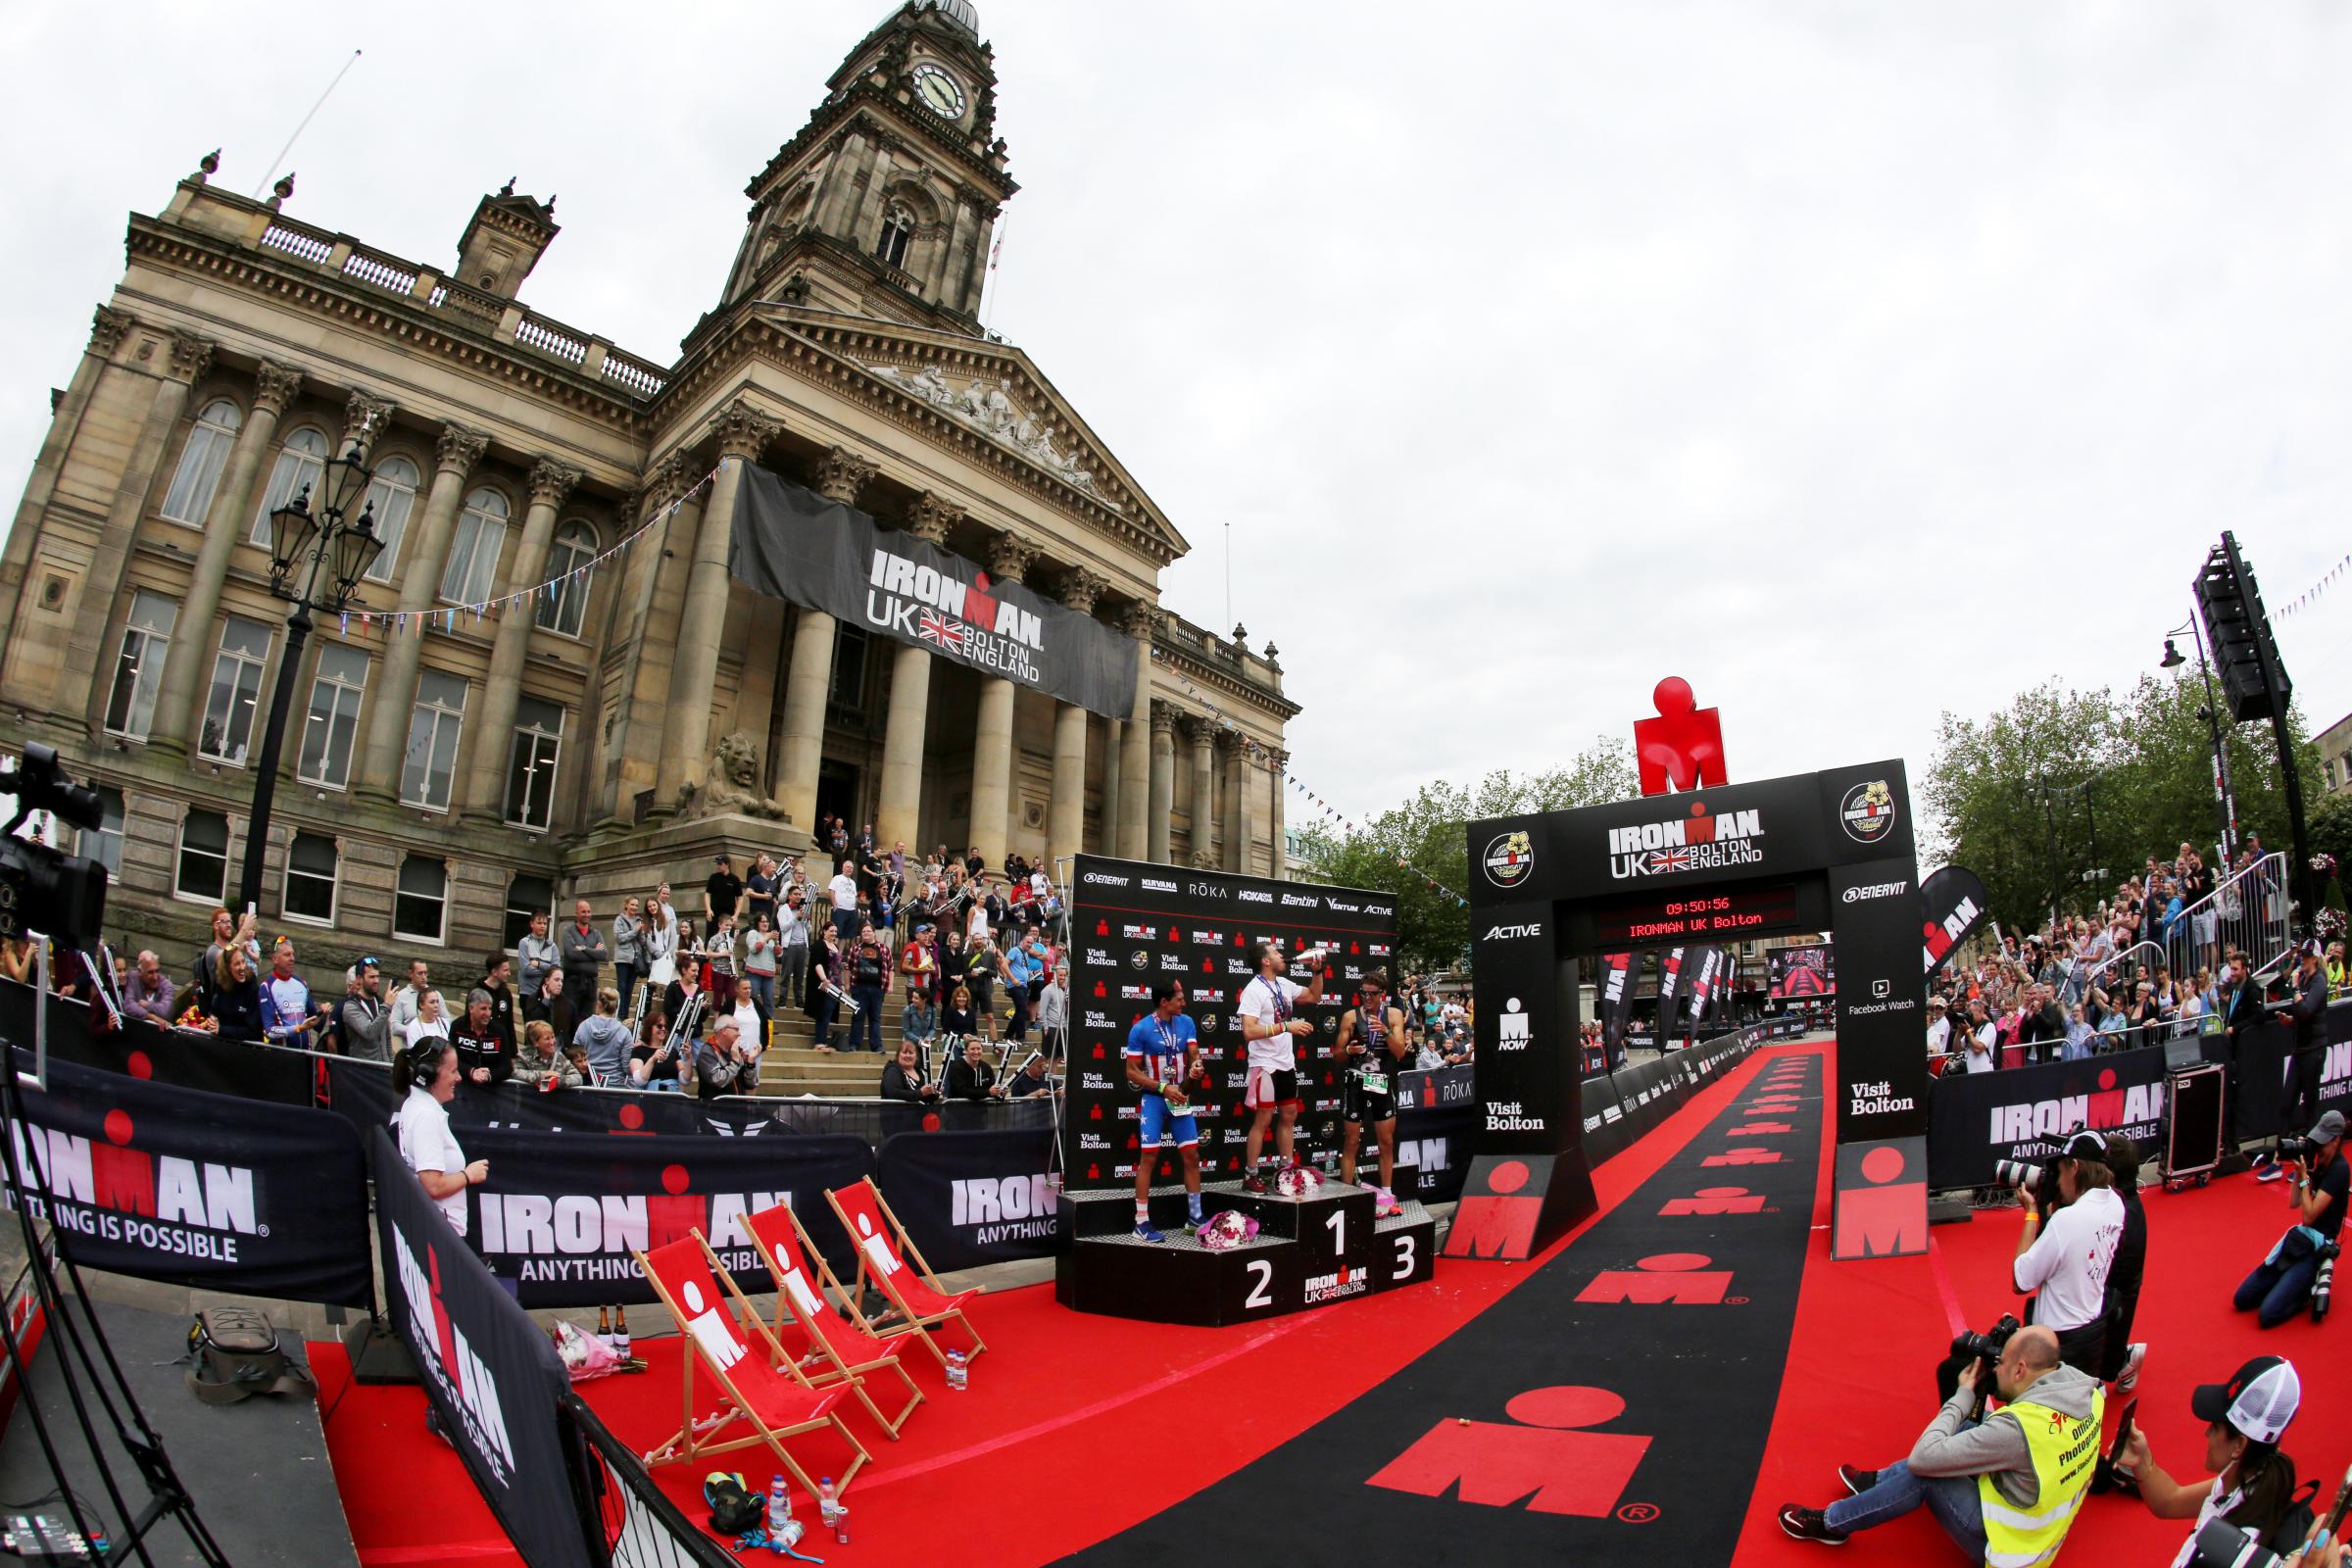 Excitement is building for the Ironman event